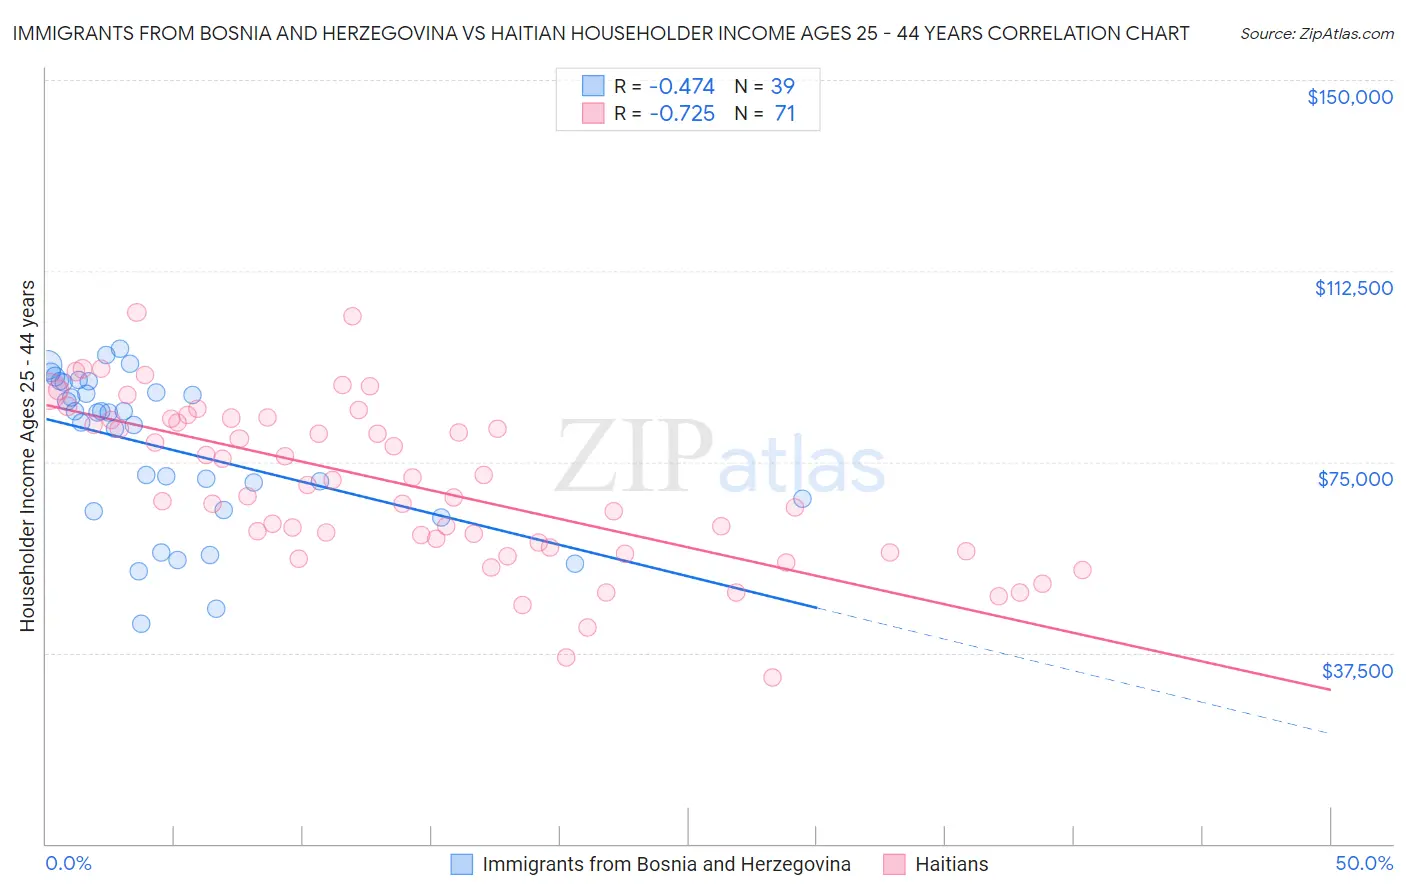 Immigrants from Bosnia and Herzegovina vs Haitian Householder Income Ages 25 - 44 years